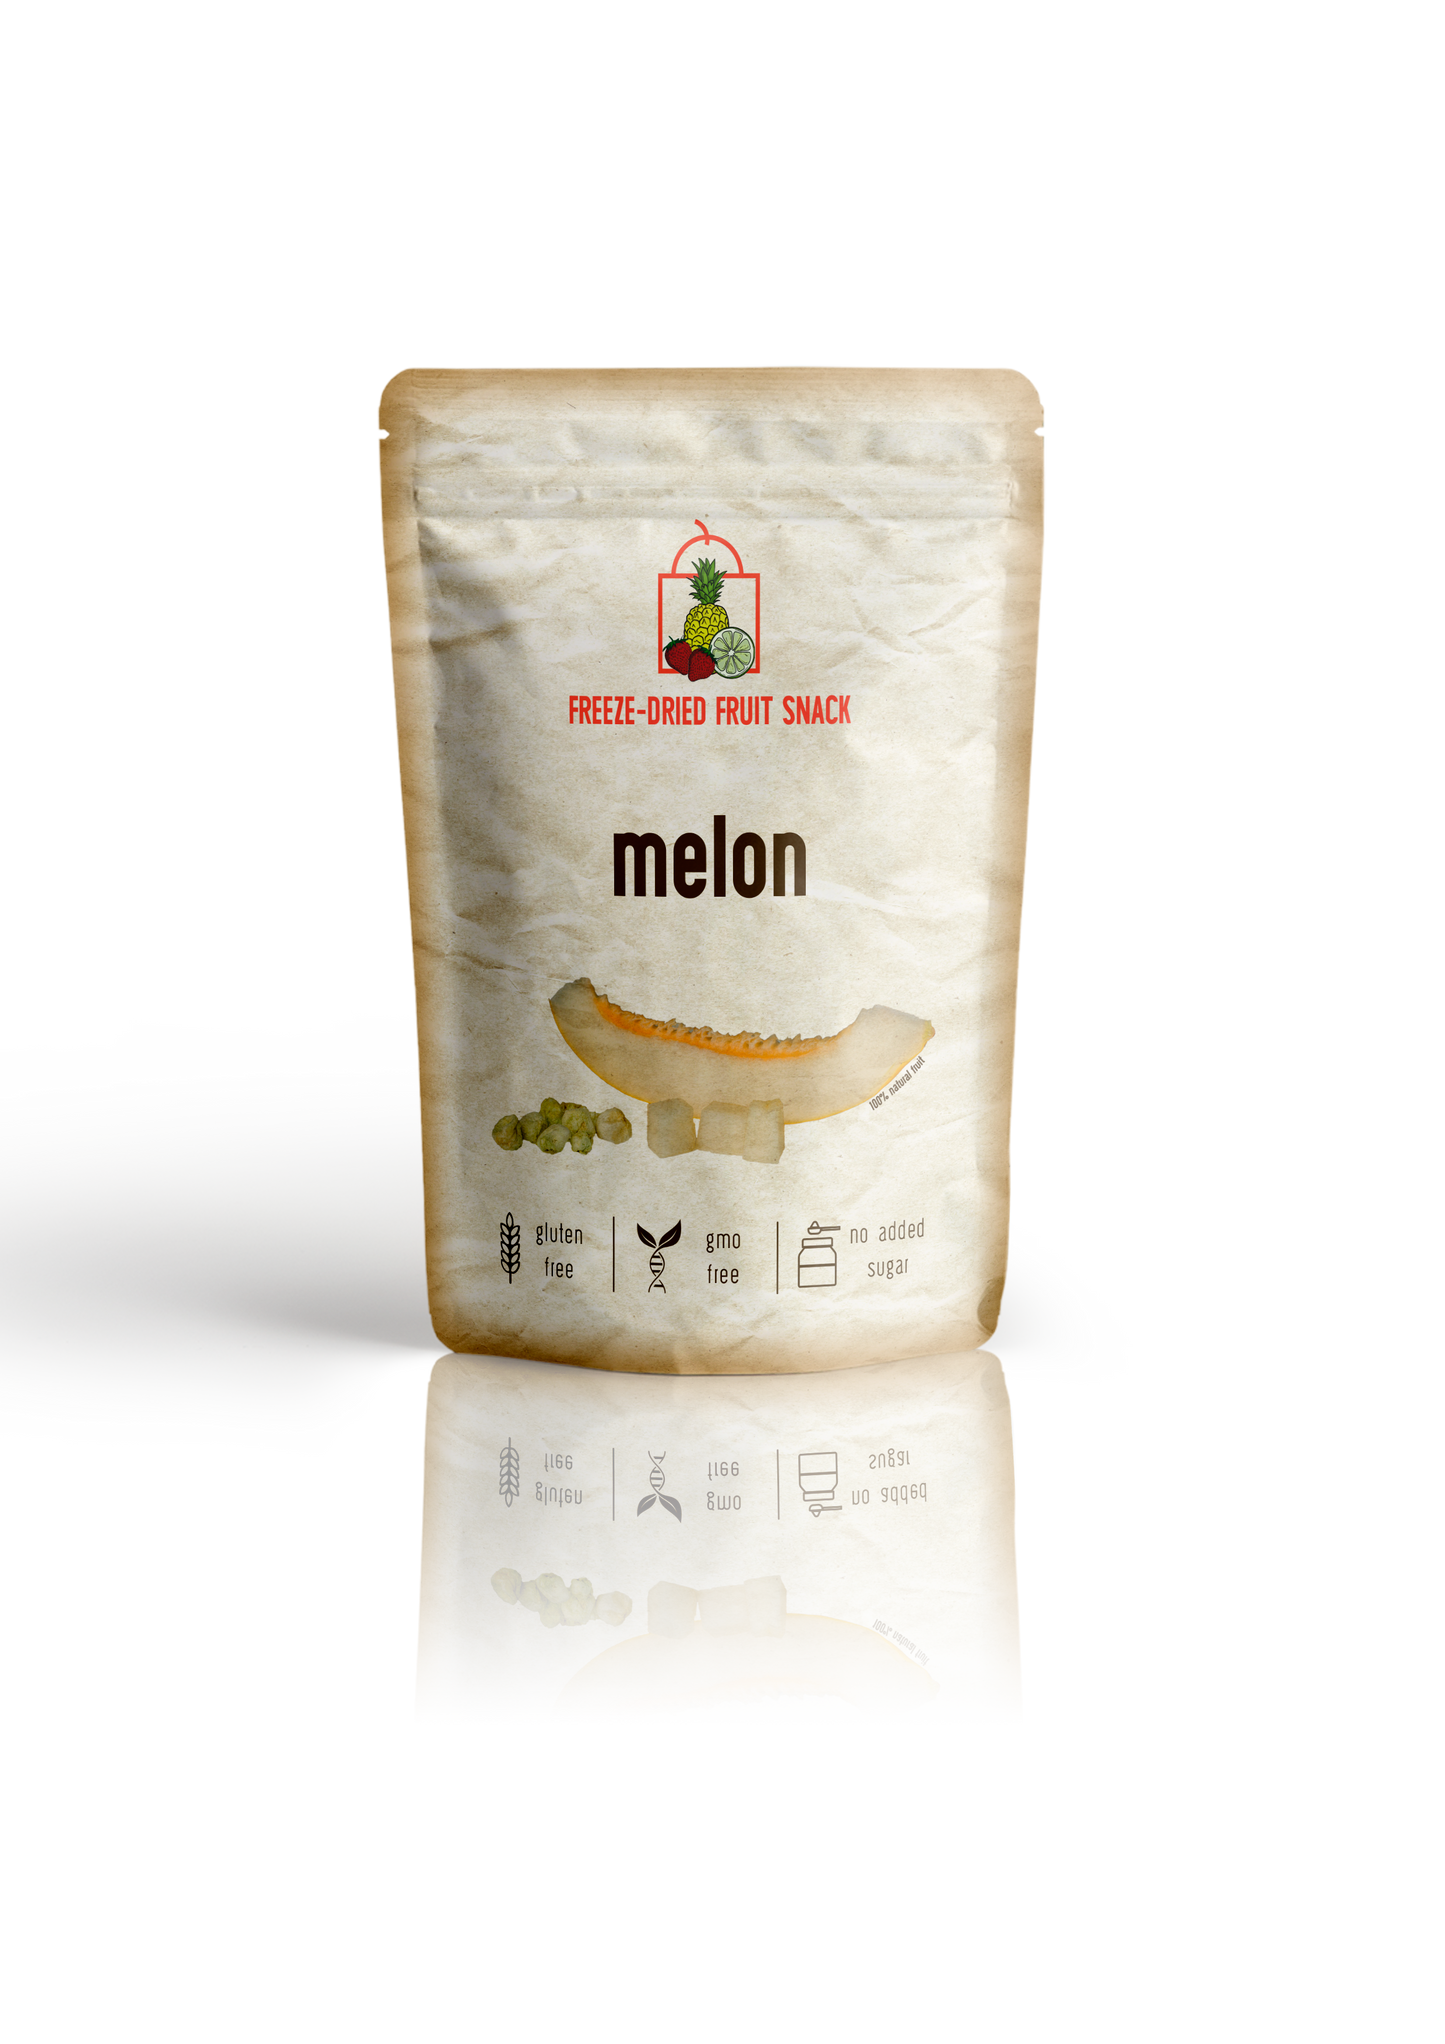 Freeze Dried Melon Snack by The Rotten Fruit Box